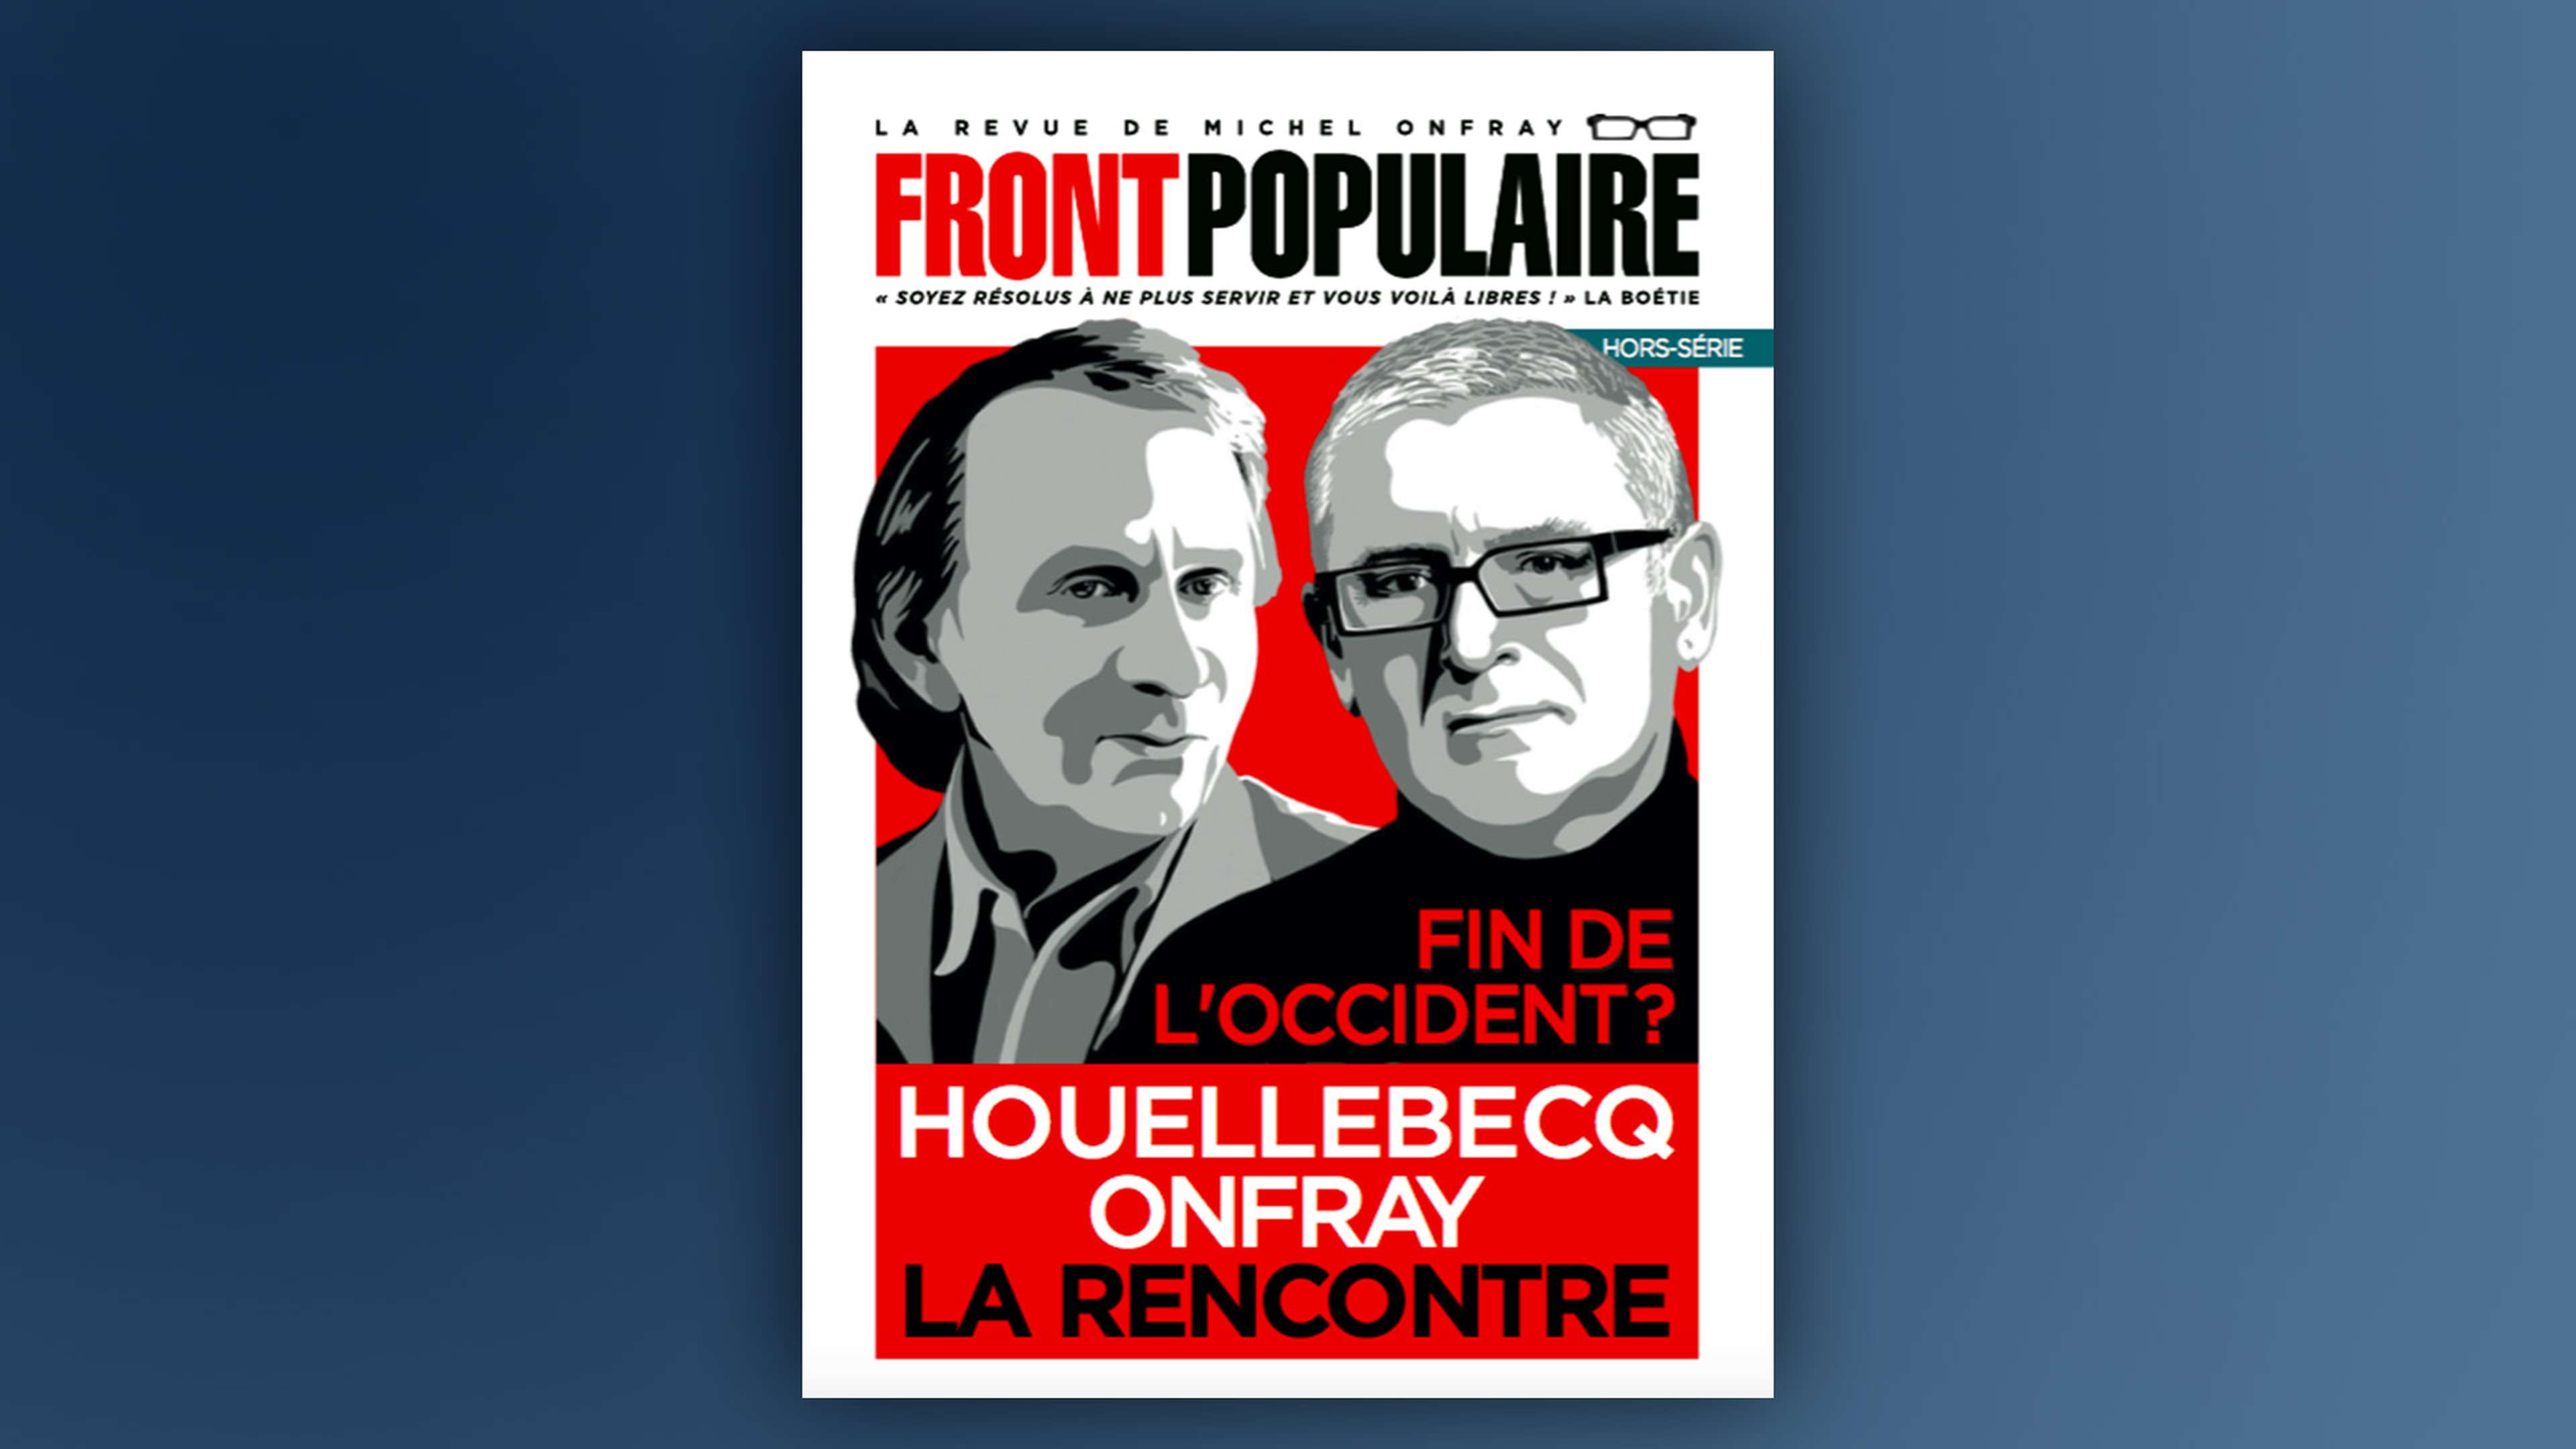 /2022/11/hors-serie-michel-onfray-houellebecq-front-populaire_1